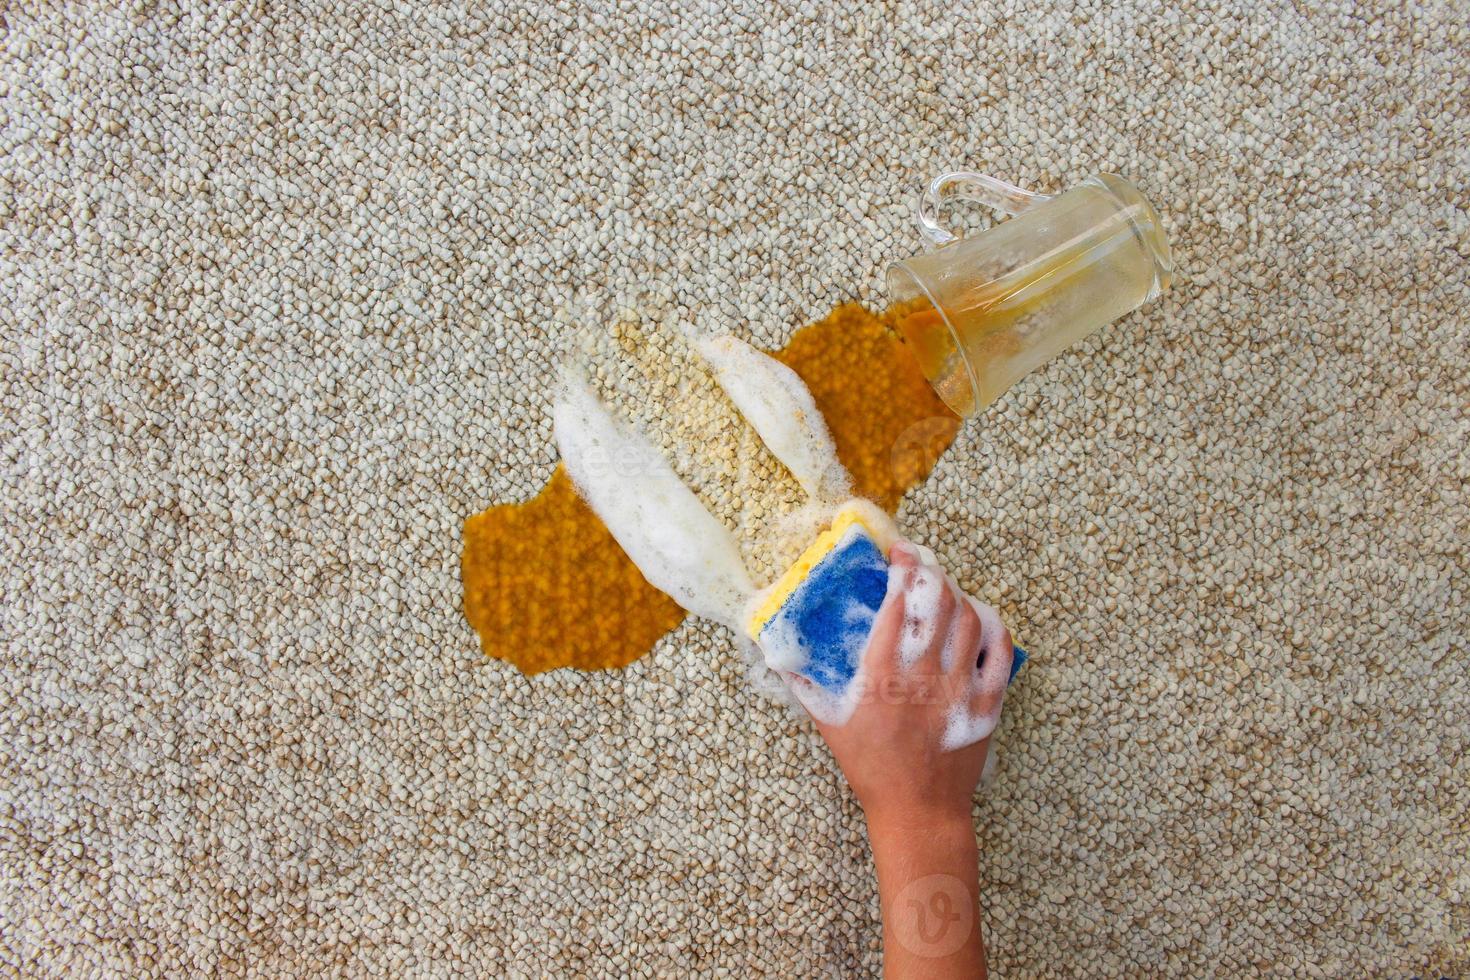 Glass of juice fell and spilled on floor. Female hand cleans the carpet with a sponge and detergent. photo